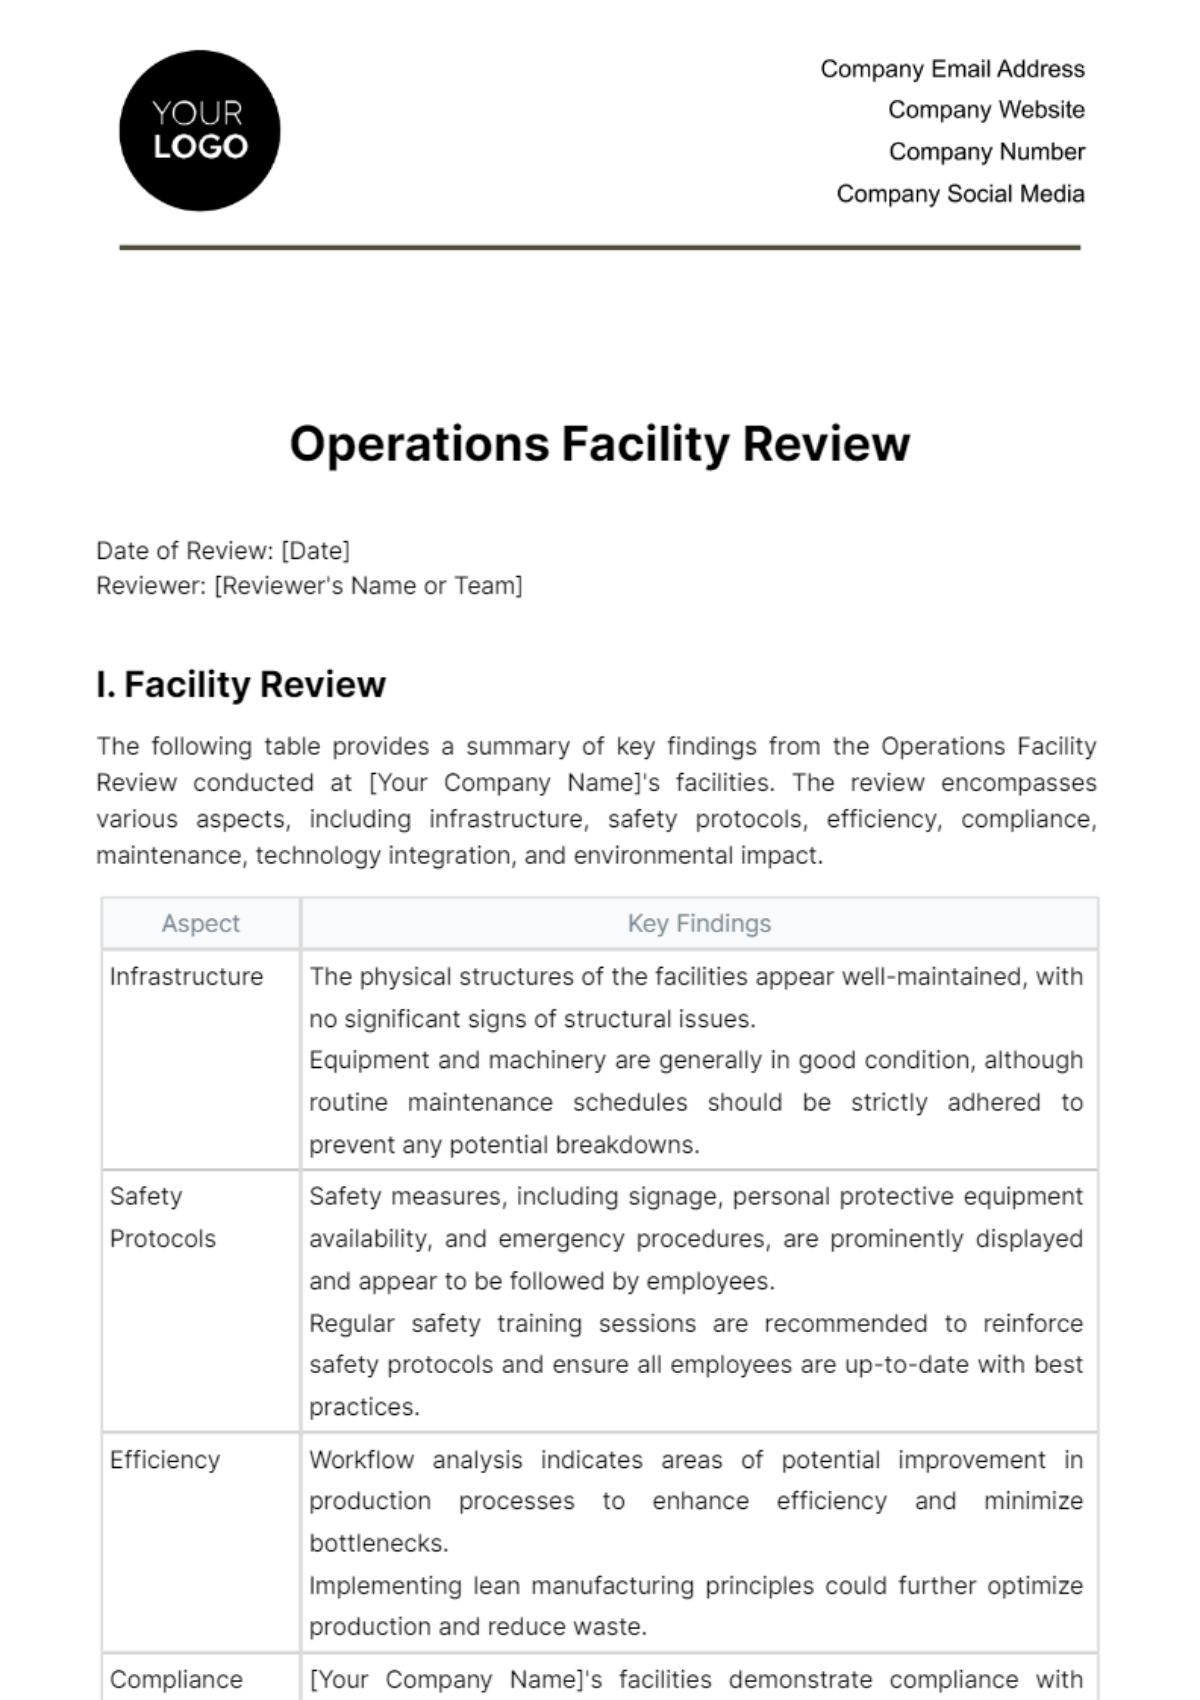 Free Operations Facility Review Template